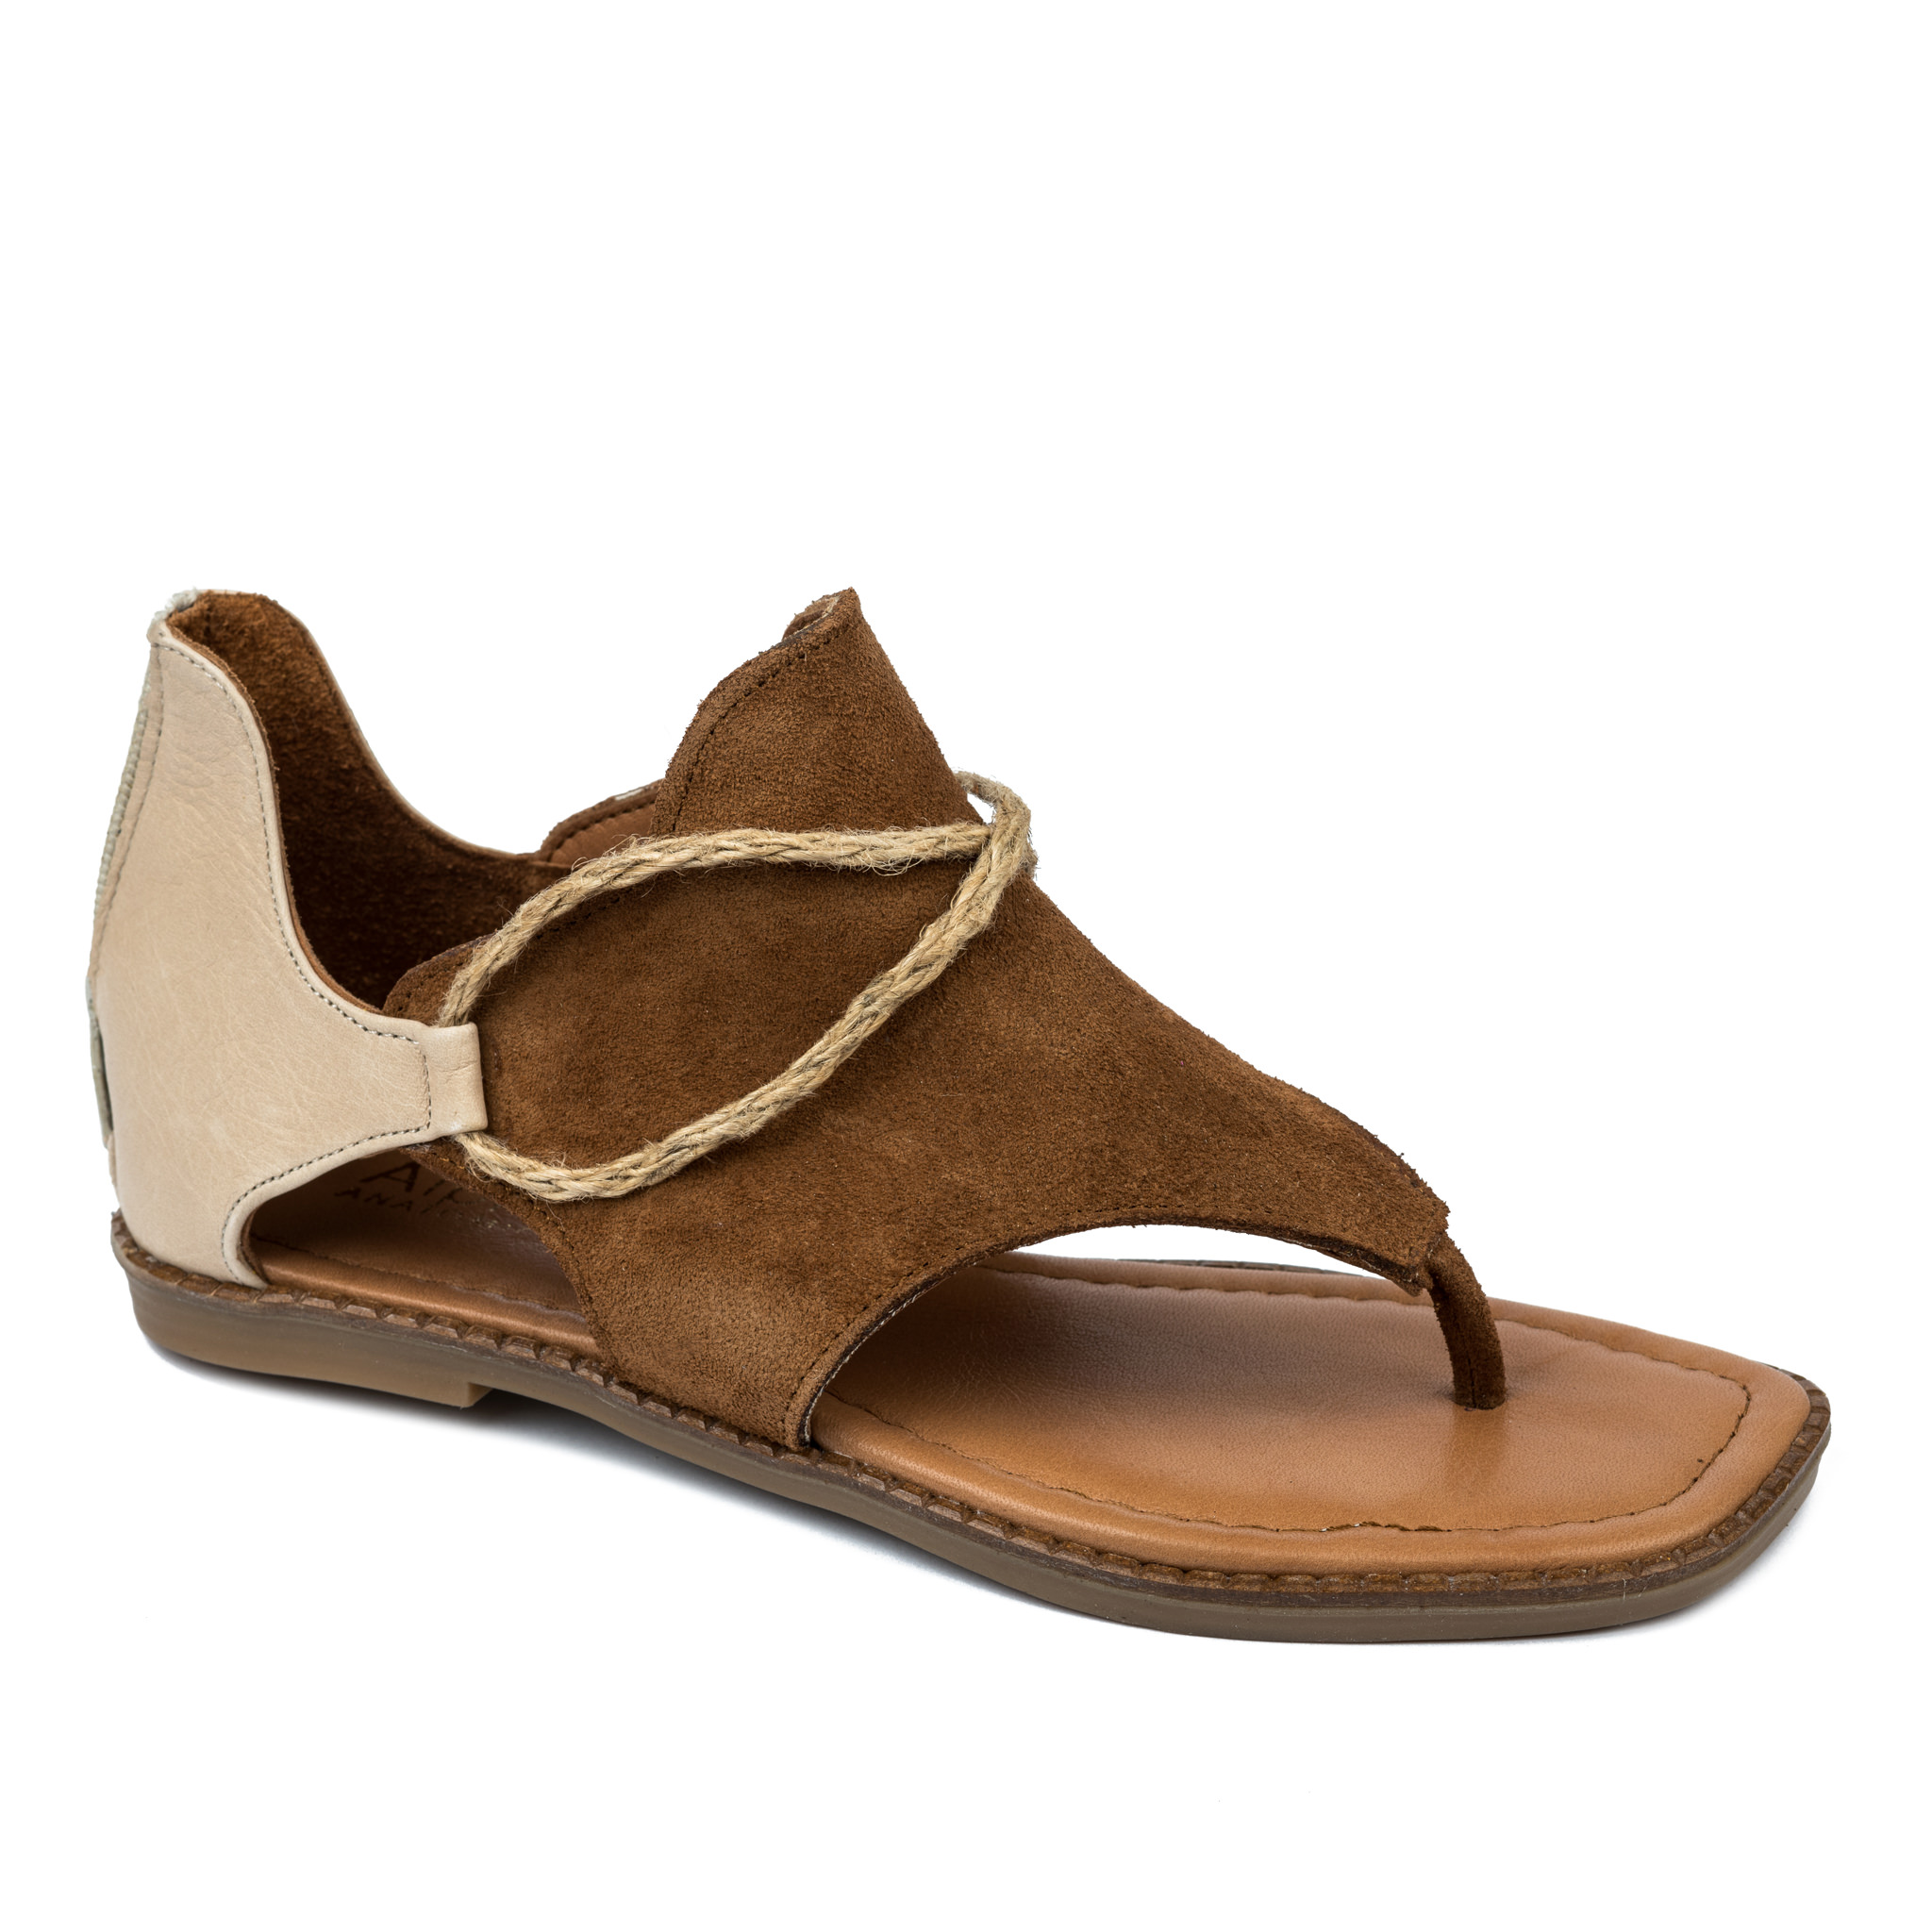 Leather sandals A643 - CAMEL